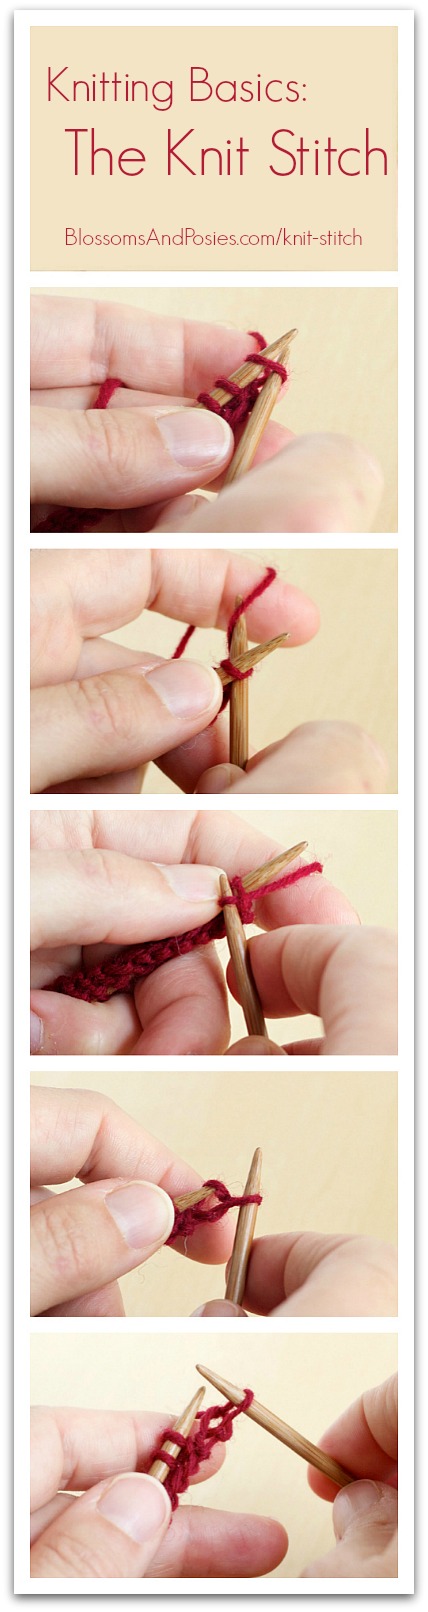 how to make the knit stitch - blossomsandposies.com